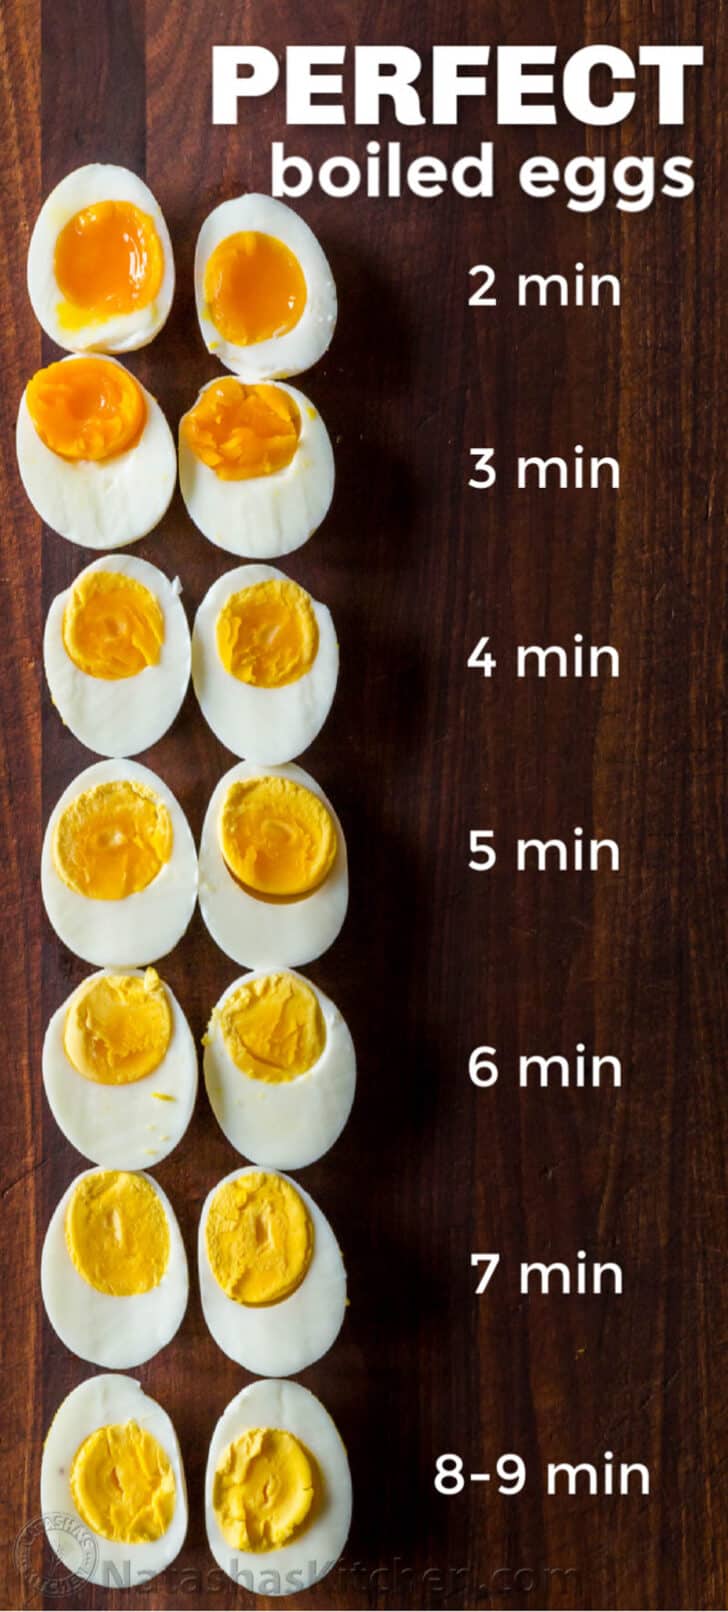 Boiled Eggs Timing Chart from soft boiled eggs to hard boiled eggs lined up in a row